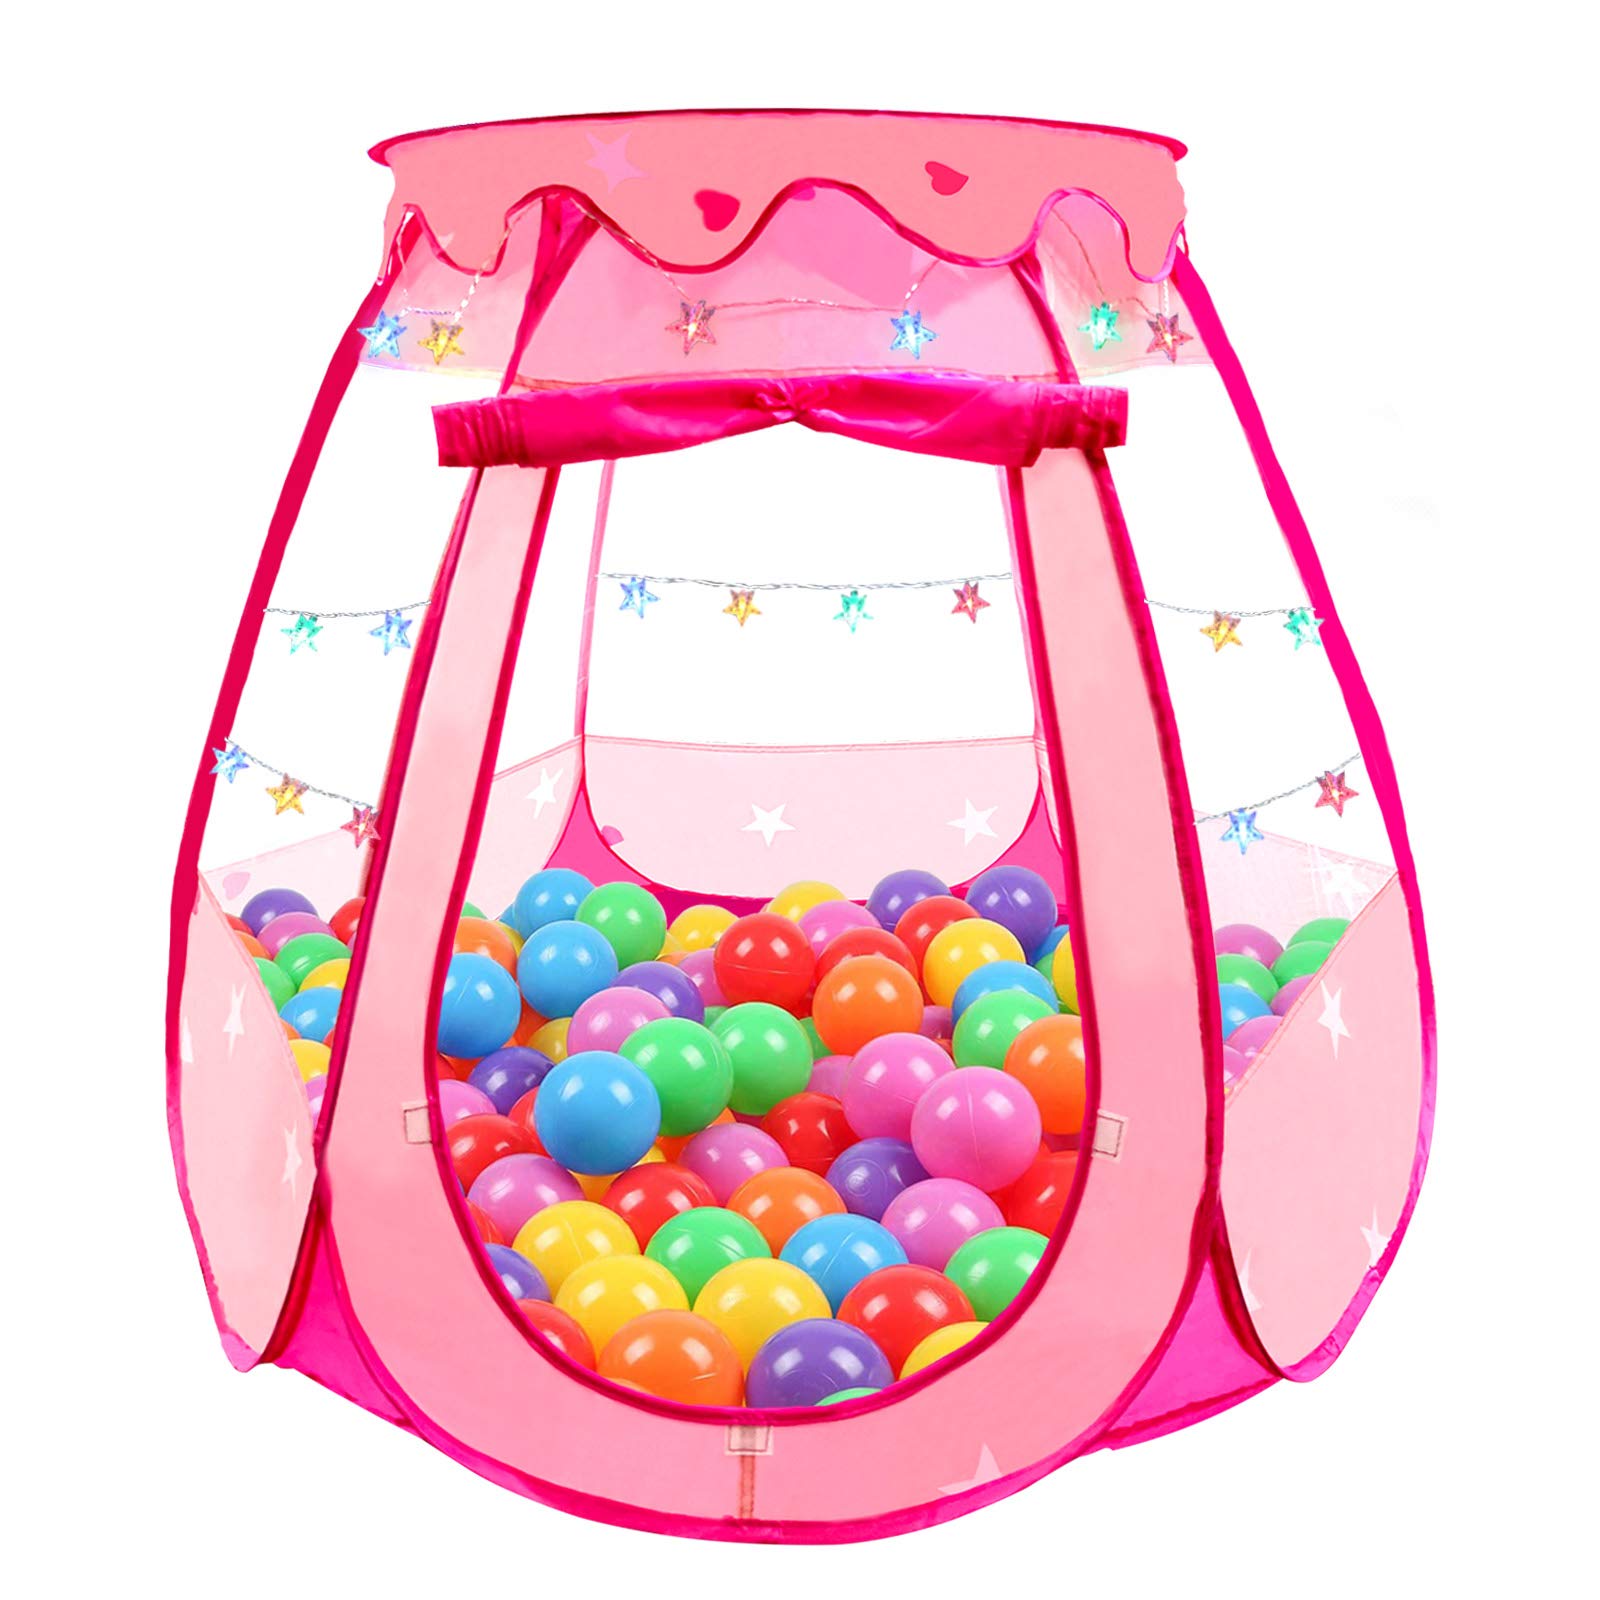 Tikolus Pop Up Princess Tent with Colorful Star Lights, Toys for 1 2 3 Year Old Girls Birthday Gift, Foldable Ball Pit with Carrying Bag, Indoor Outdoor Play Tent for Kids (Balls Not Included)